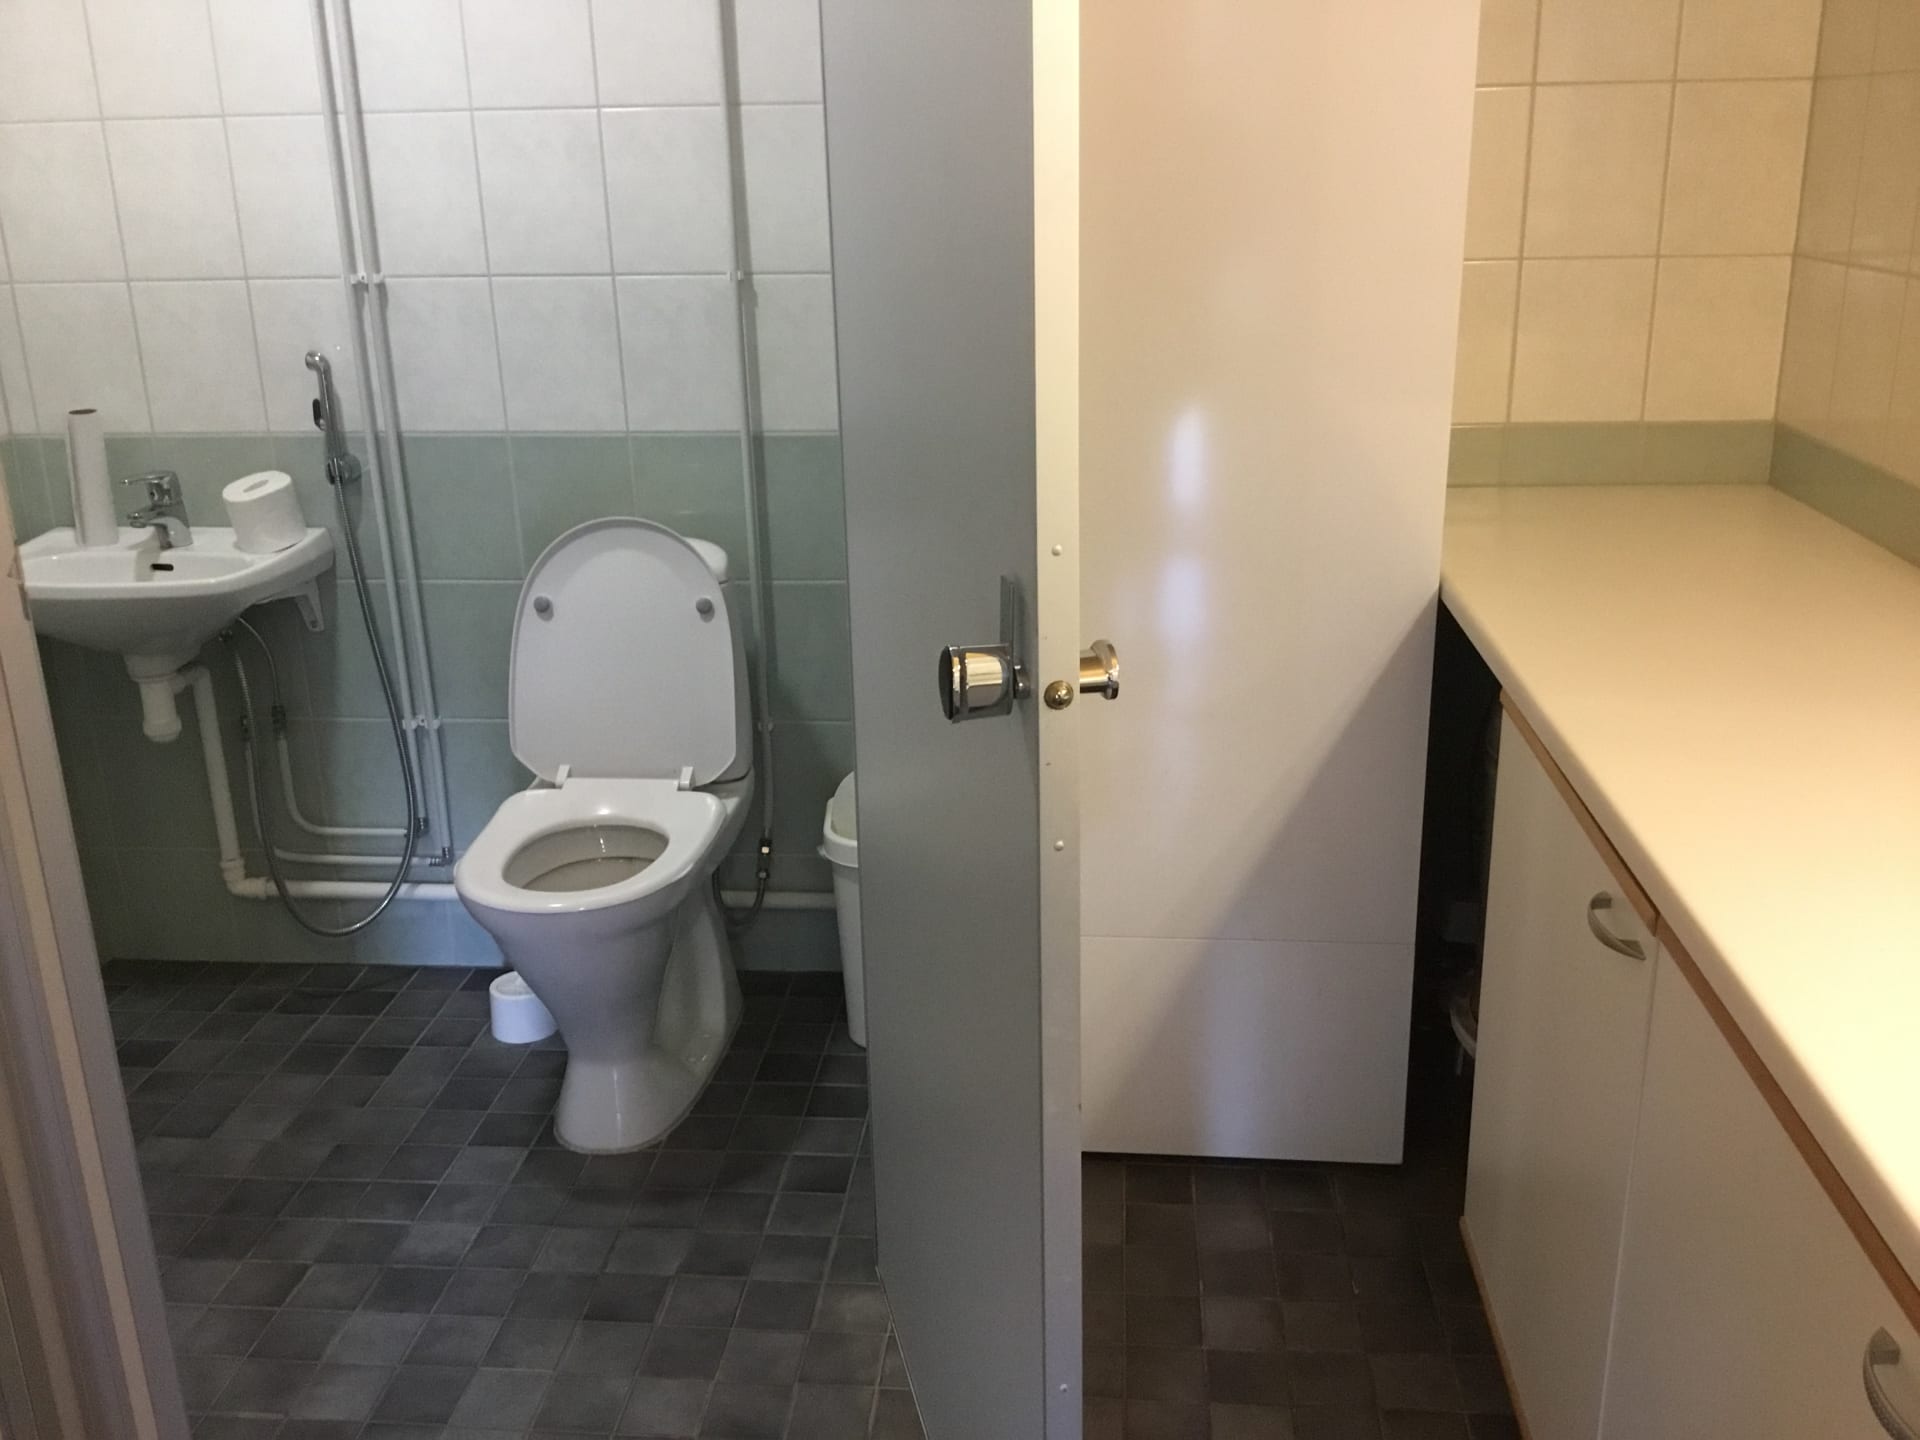 Toilets are separate for men and women.